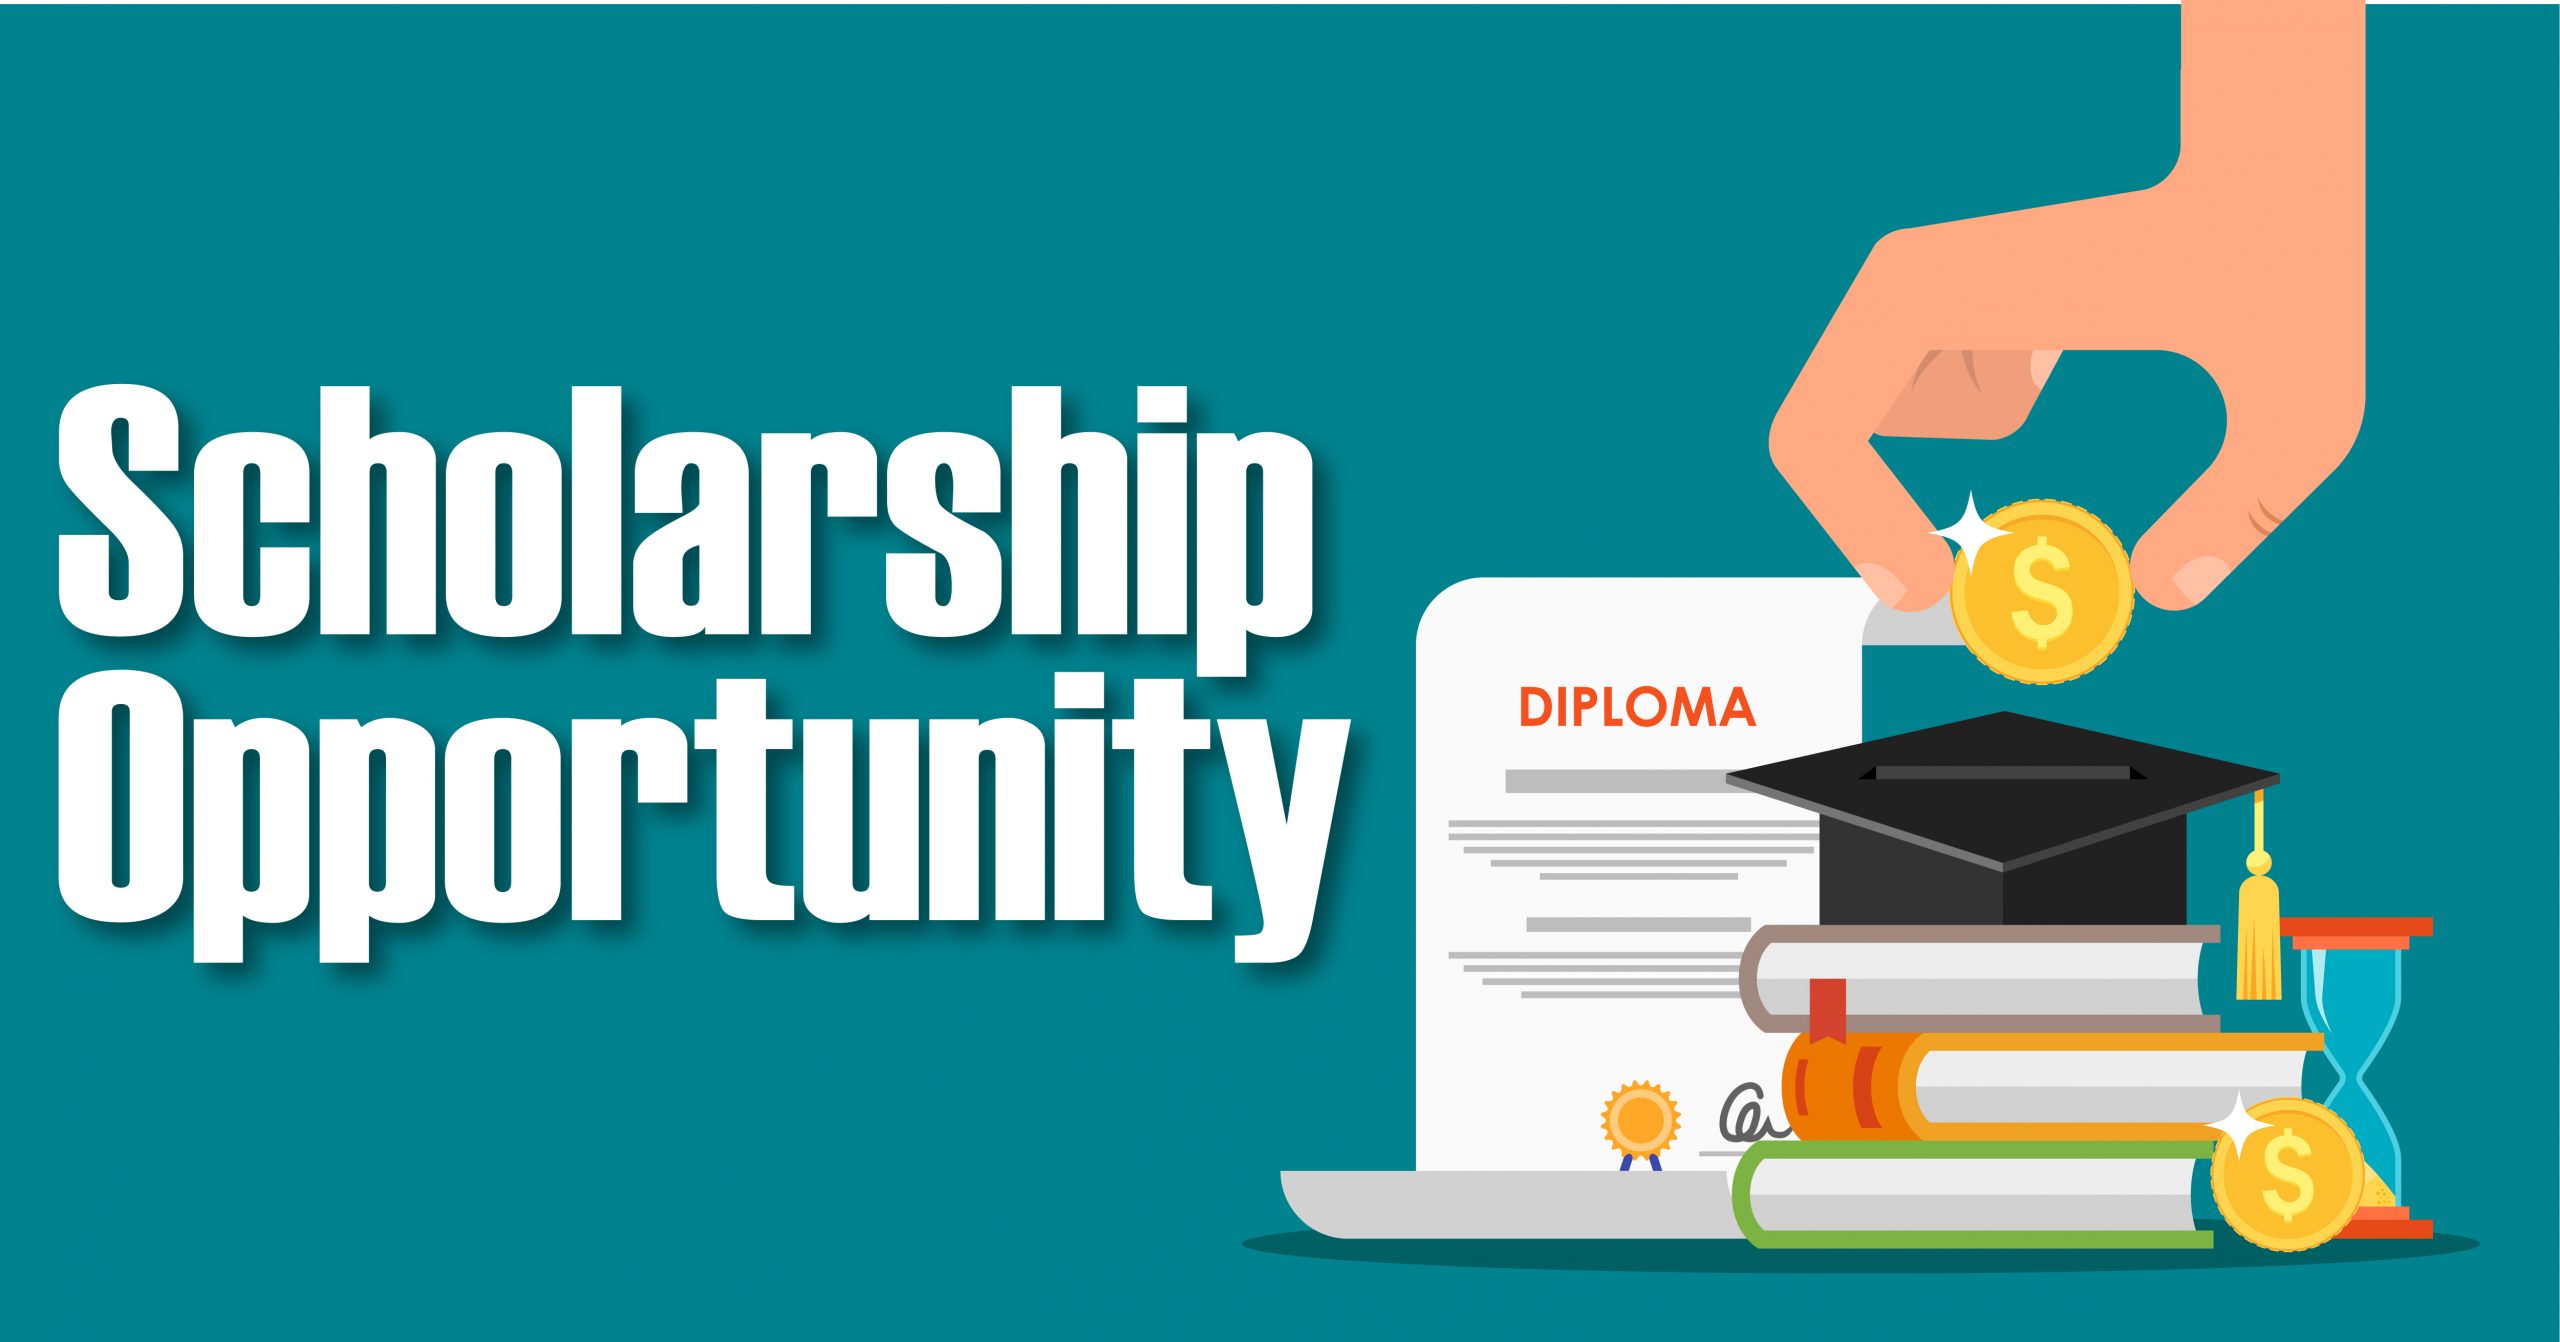 scholarships for graduate students education